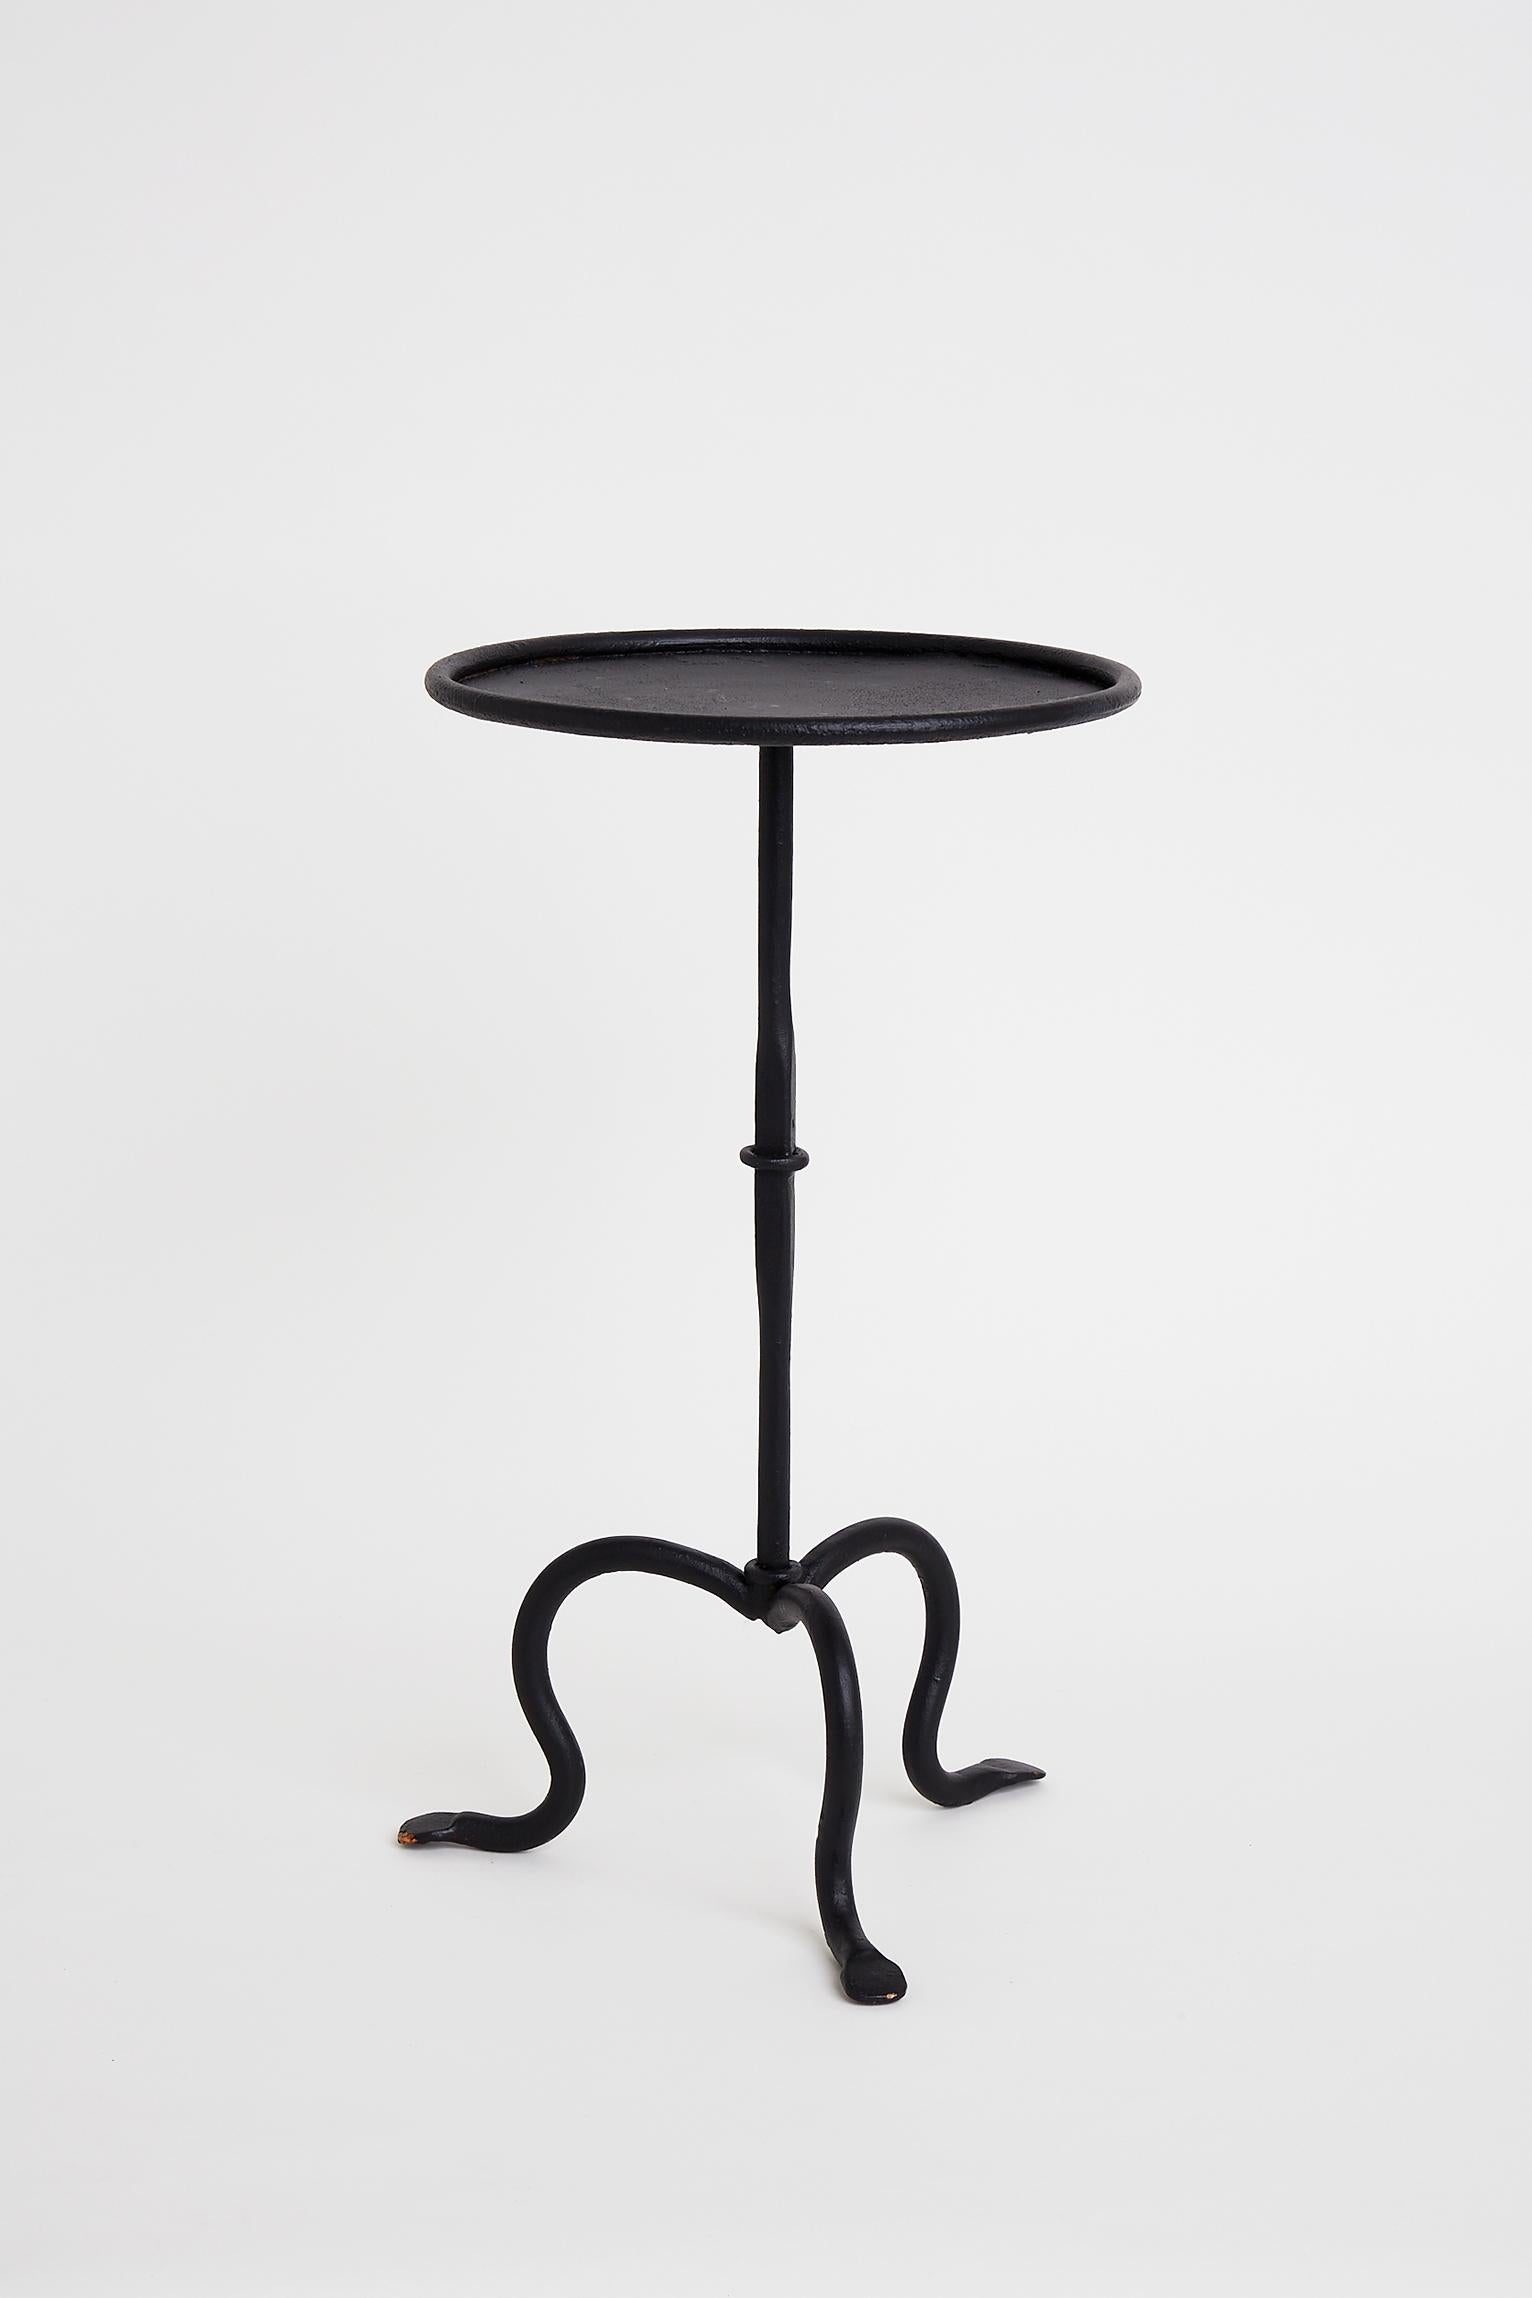 A black enameled wrought iron martini table.
Spain, late 20th century.